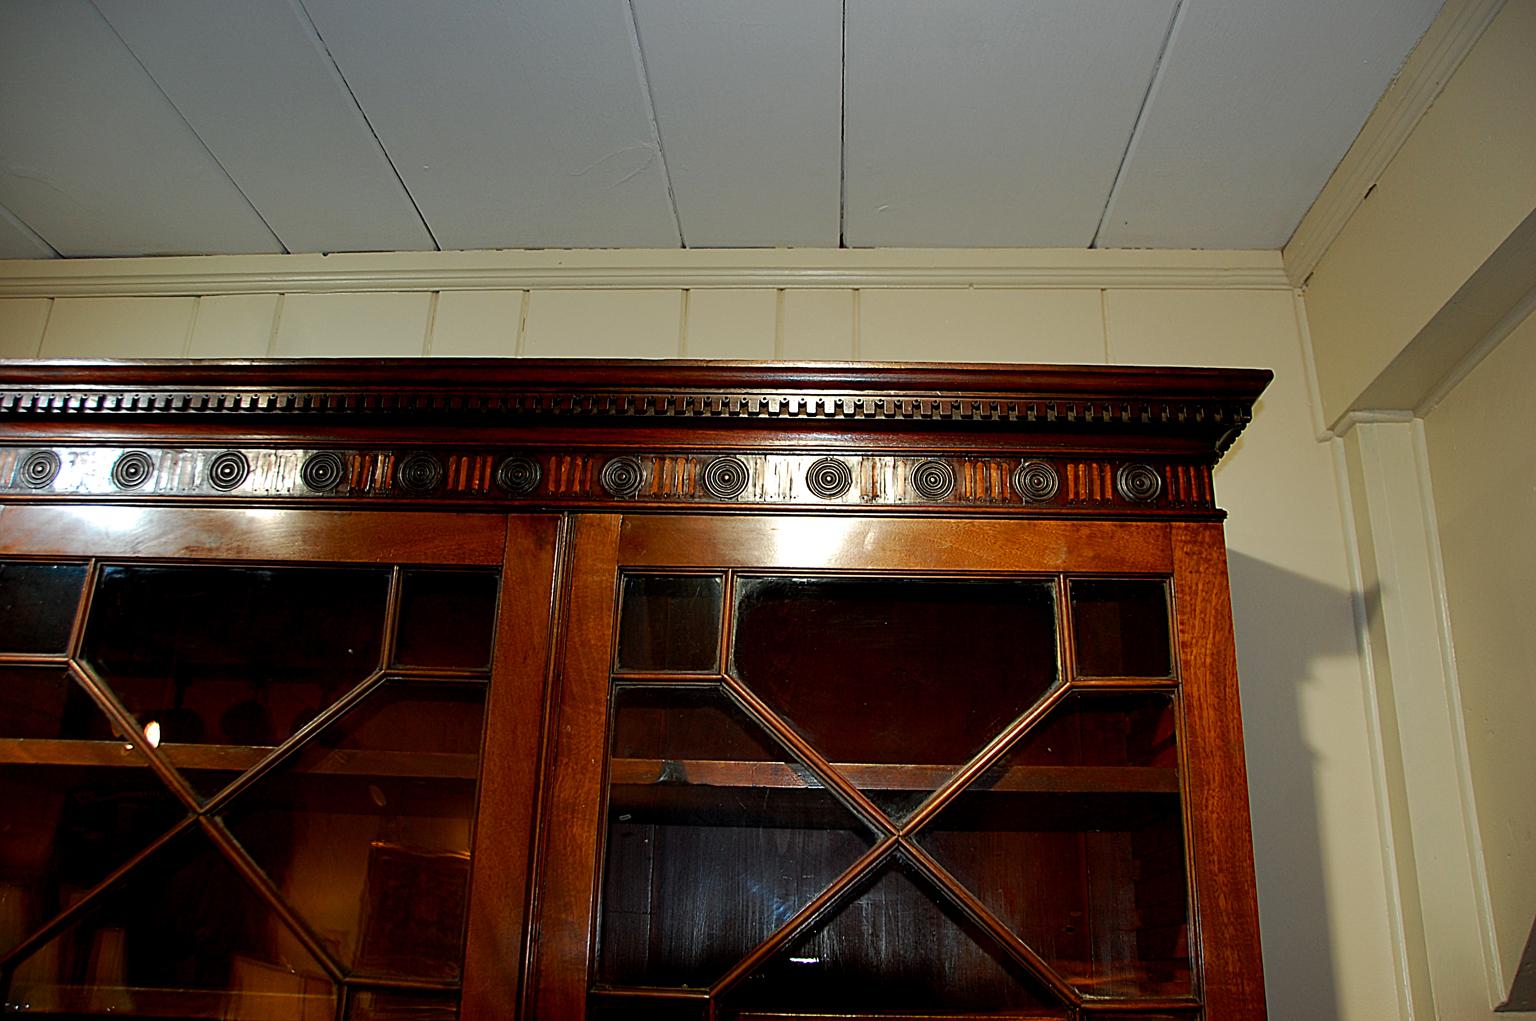 18th Century English Georgian Chippendale Mahogany Bureau Bookcase with Carved Inlaid Cornice